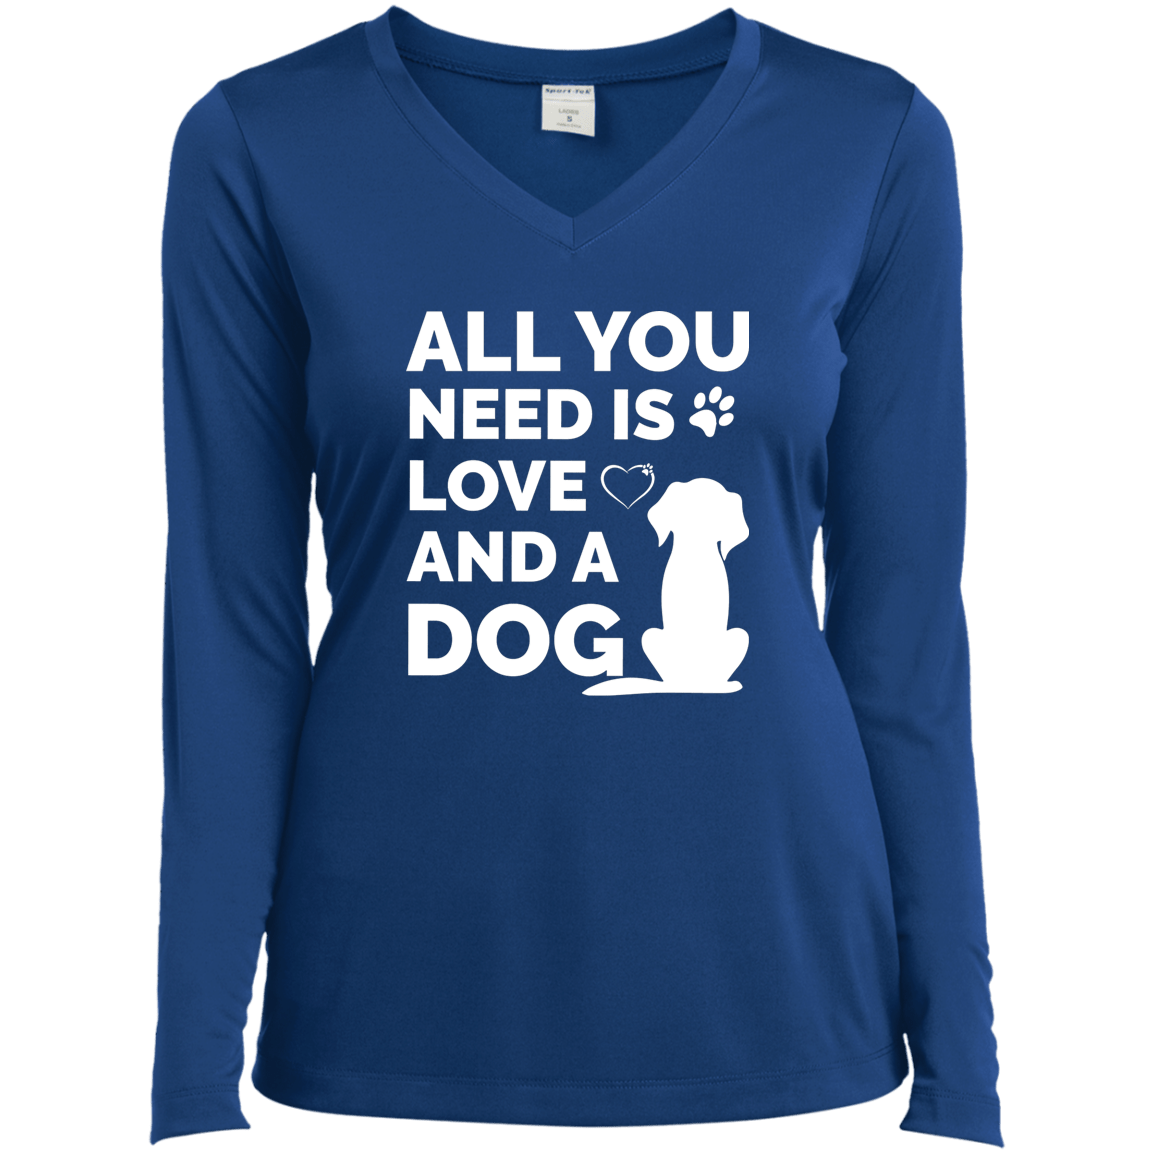 All You Need Is Love And A Dog  - Long Sleeve Ladies V Neck.